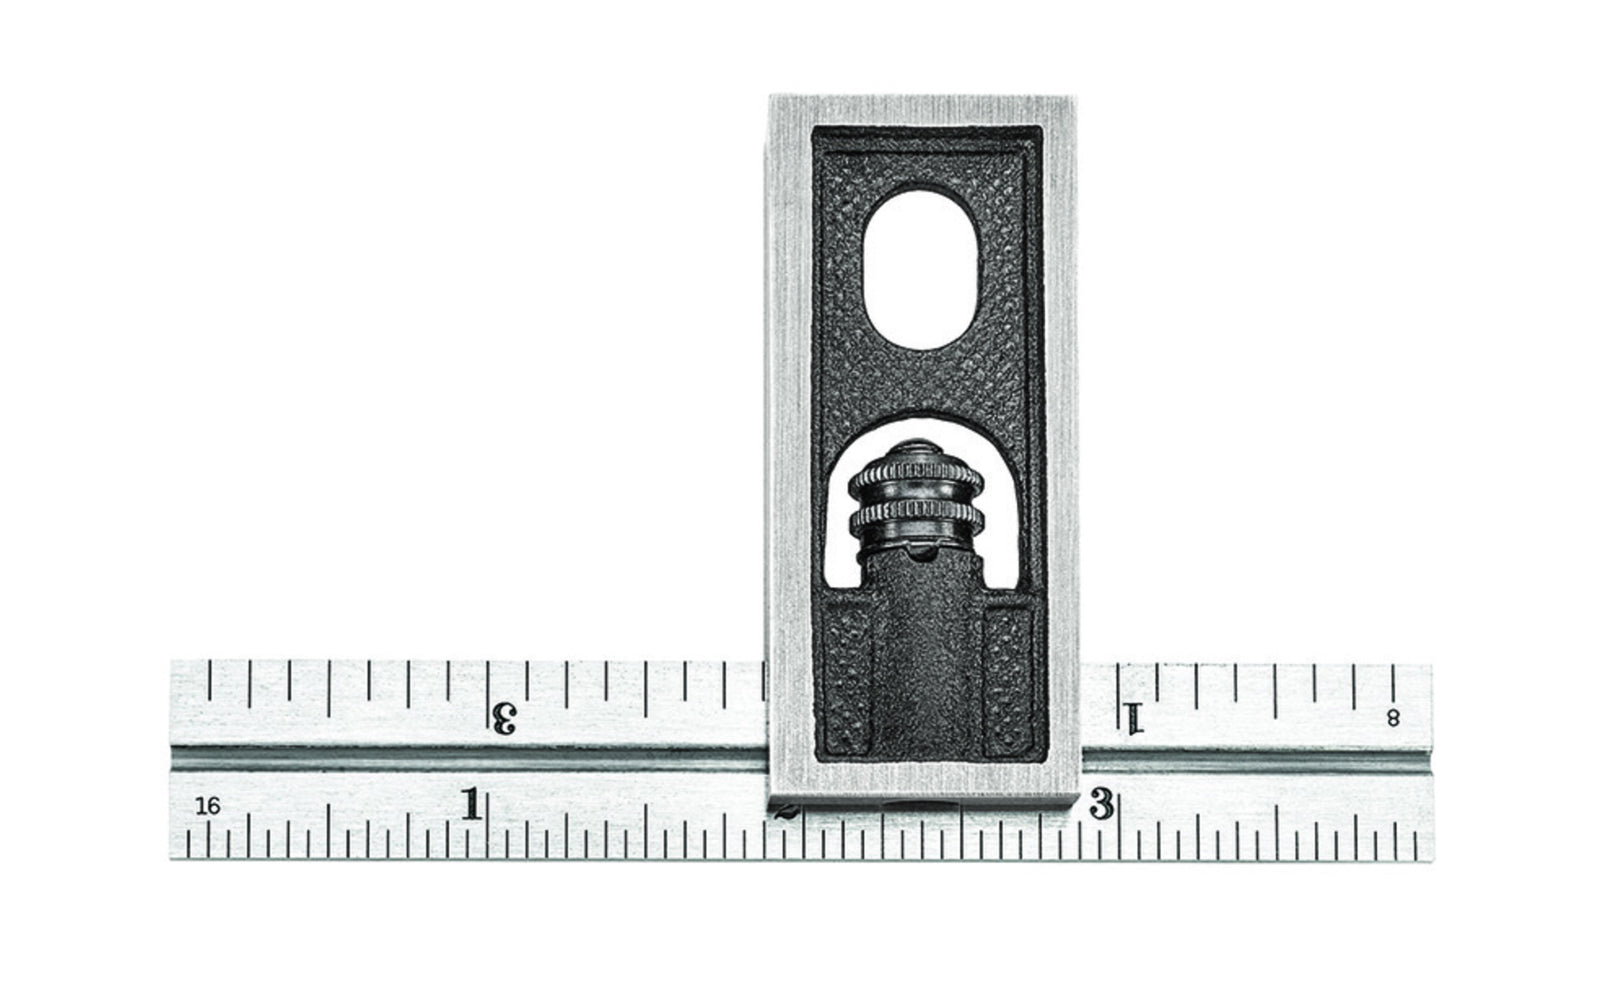 Starrett Inch Reading Double Square is very popular with machinists, toolmakers, & patternmakers. The sliding blades are adjustable making it practical for a wide variety of uses. The faces of the head are ground square. 4